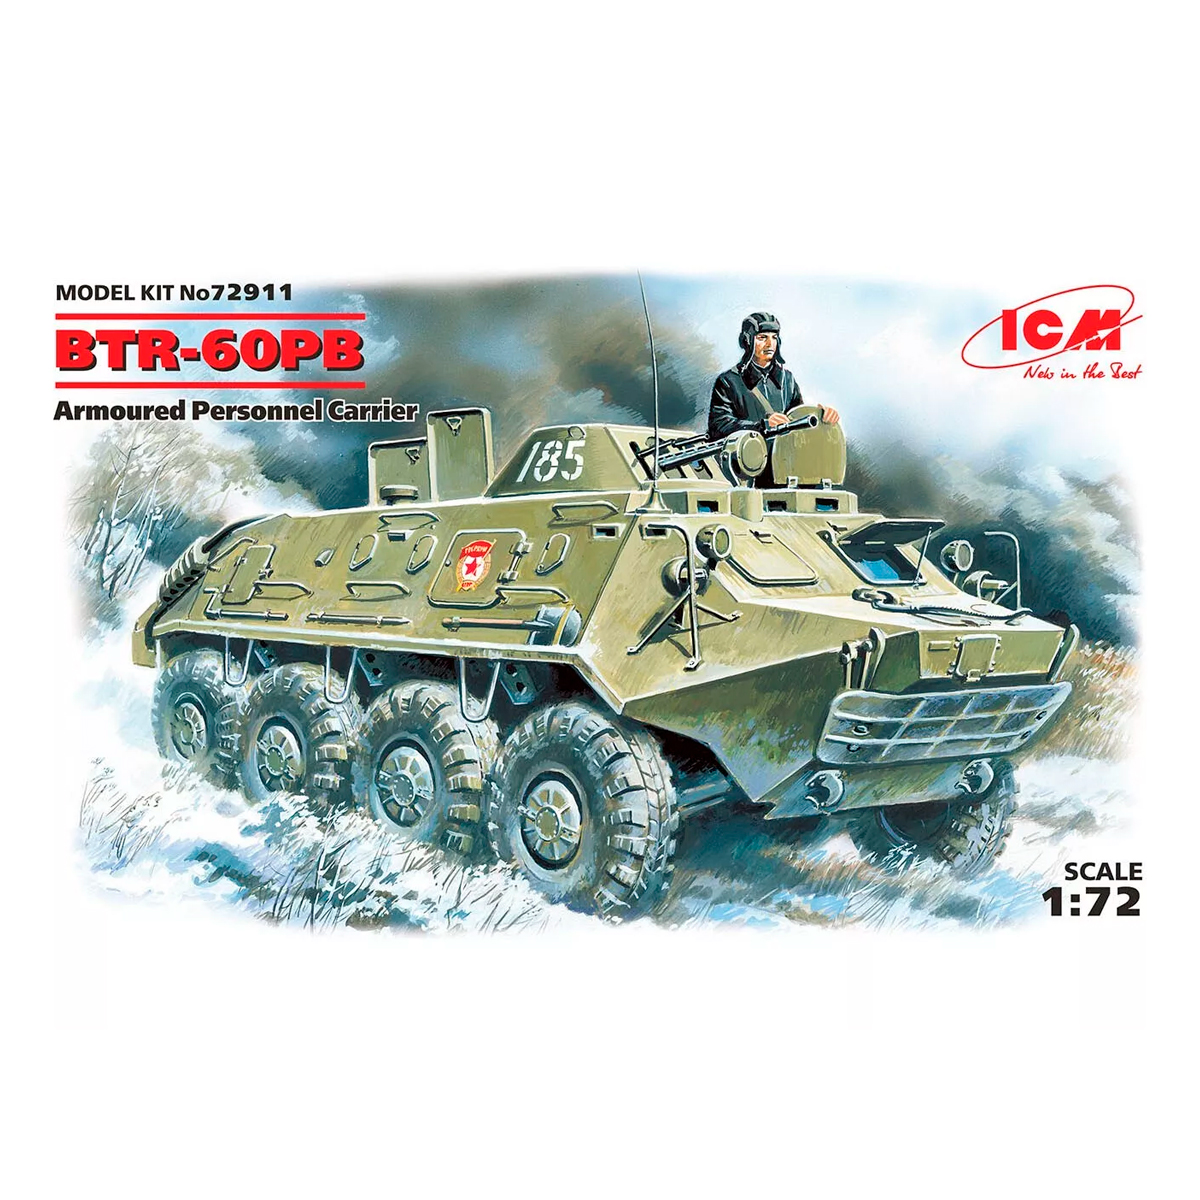 BTR-60PB, Armoured Personnel Carrier 1/72